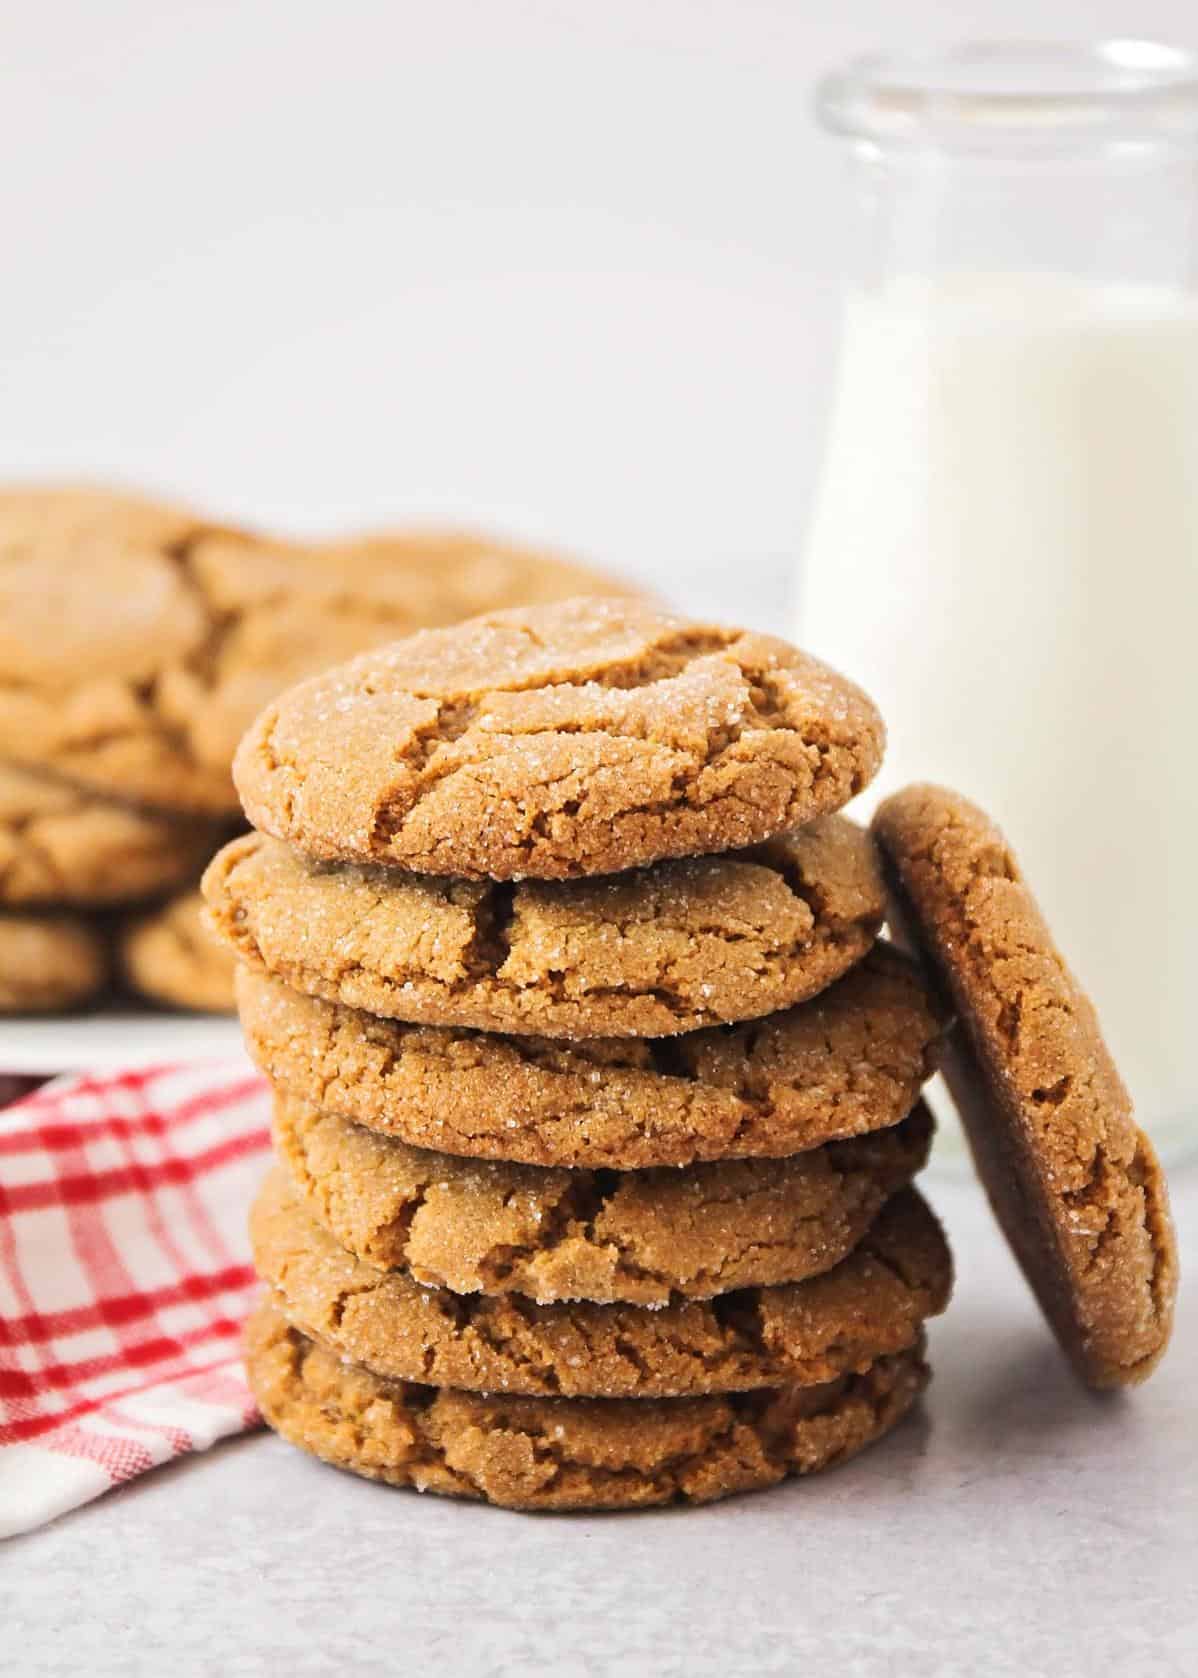  It's hard to resist the warm aroma of these freshly baked ginger cookies.